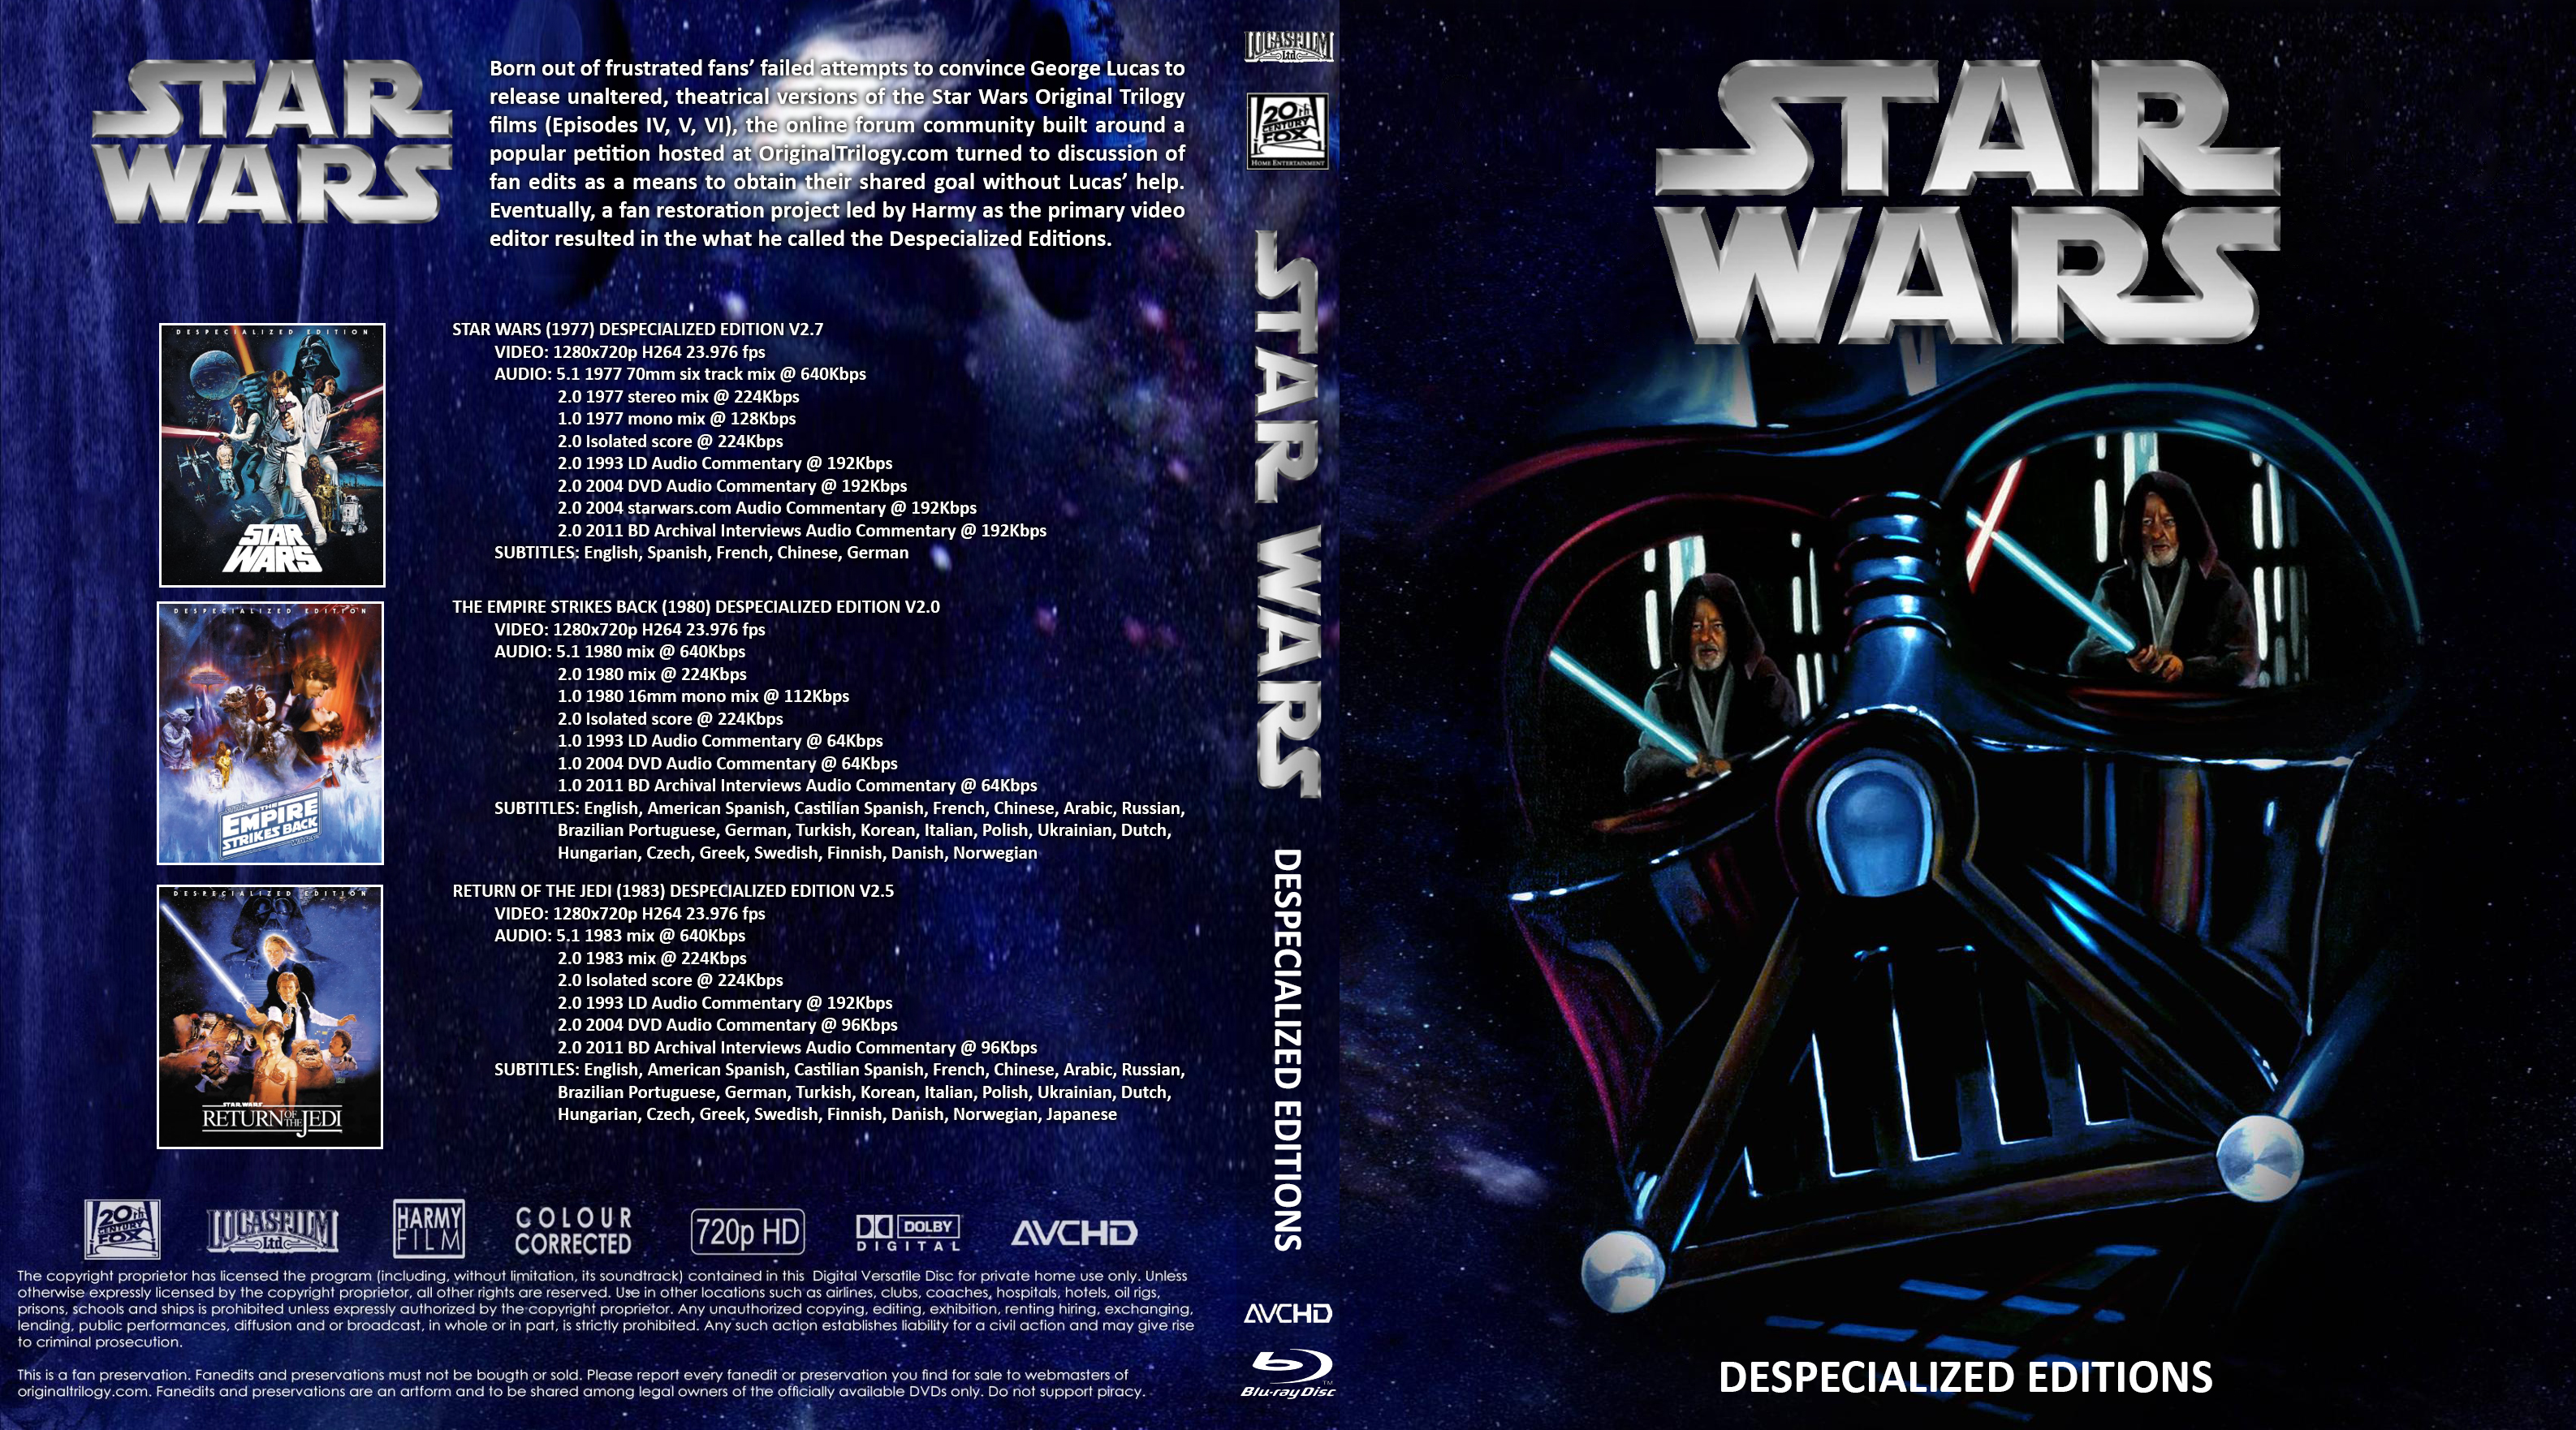 Blu-ray - Star Wars Trilogy Despecialized Editions